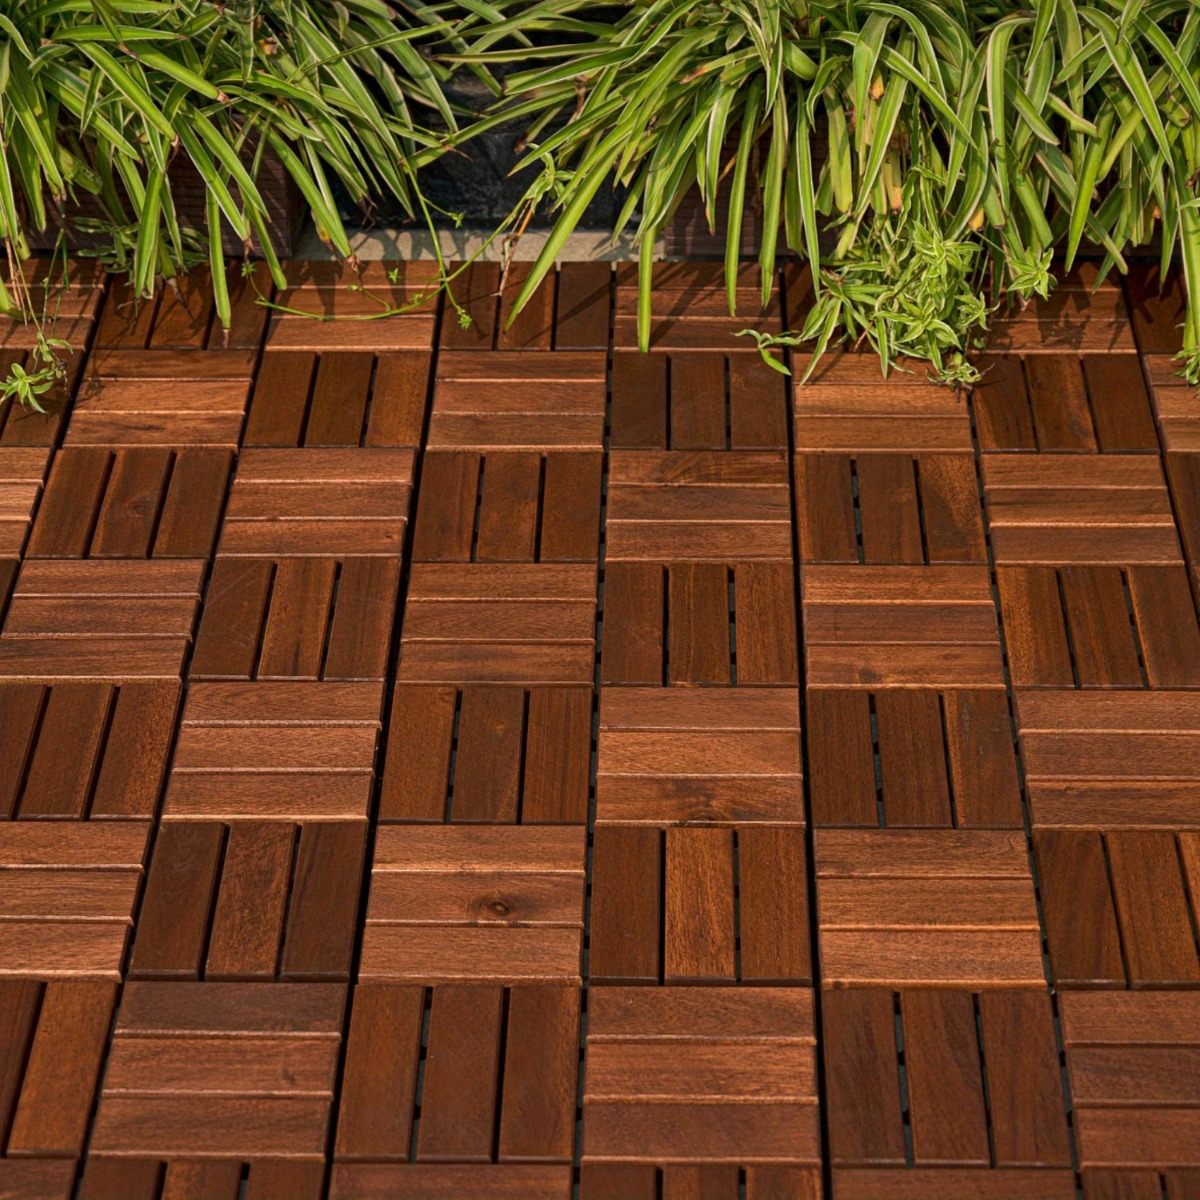 

Deck Tiles - Patio Pavers - Acacia Wood Outdoor Flooring - Interlocking Patio Tiles - 12"x12" (10/20/30 Pack) - Checker Pattern Decking For Patio, Bancony, Pool Side